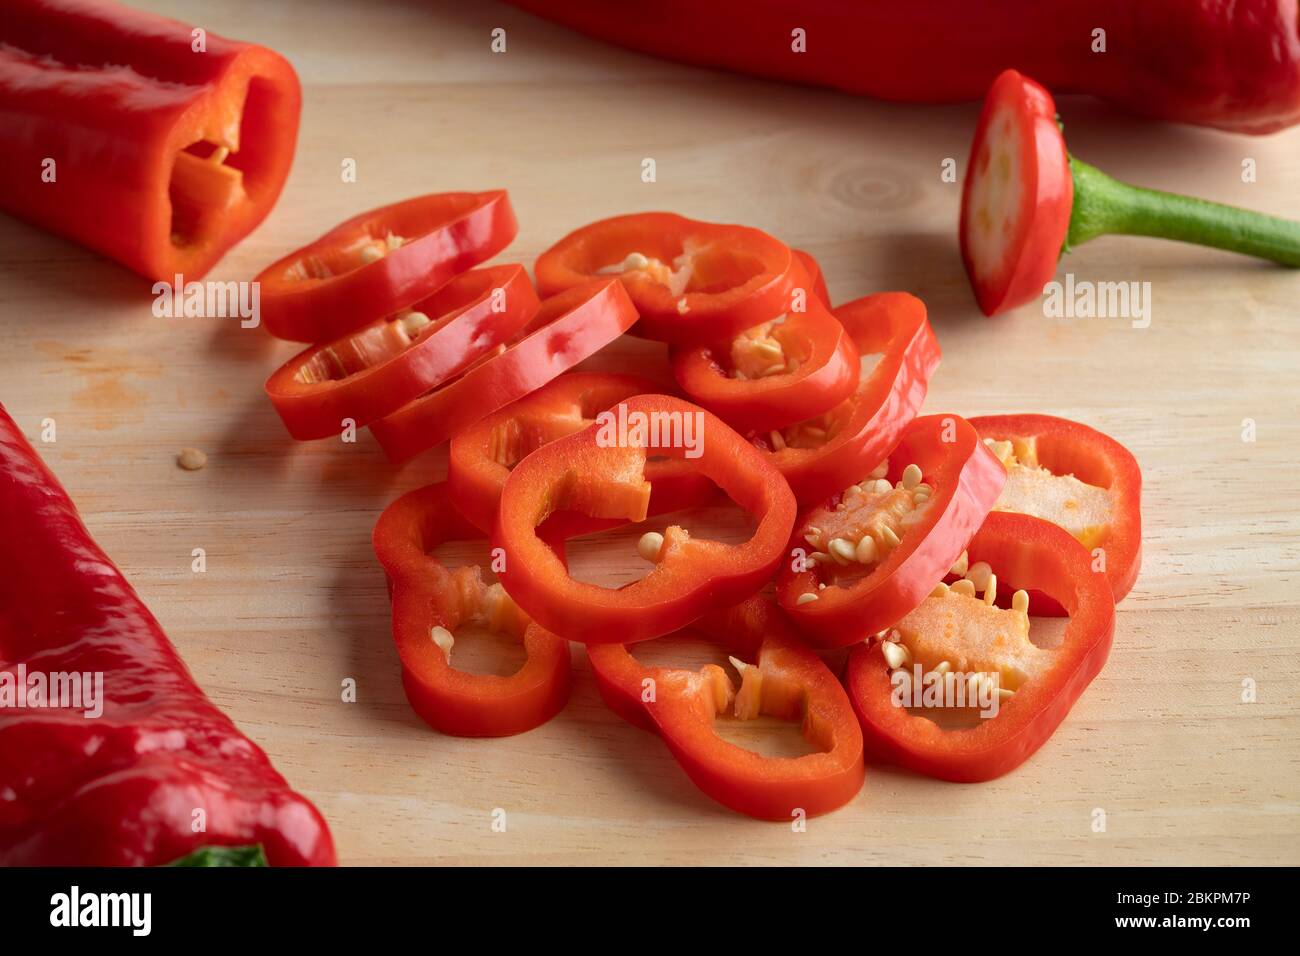 Slices of fresh red pointed peppers close up Stock Photo